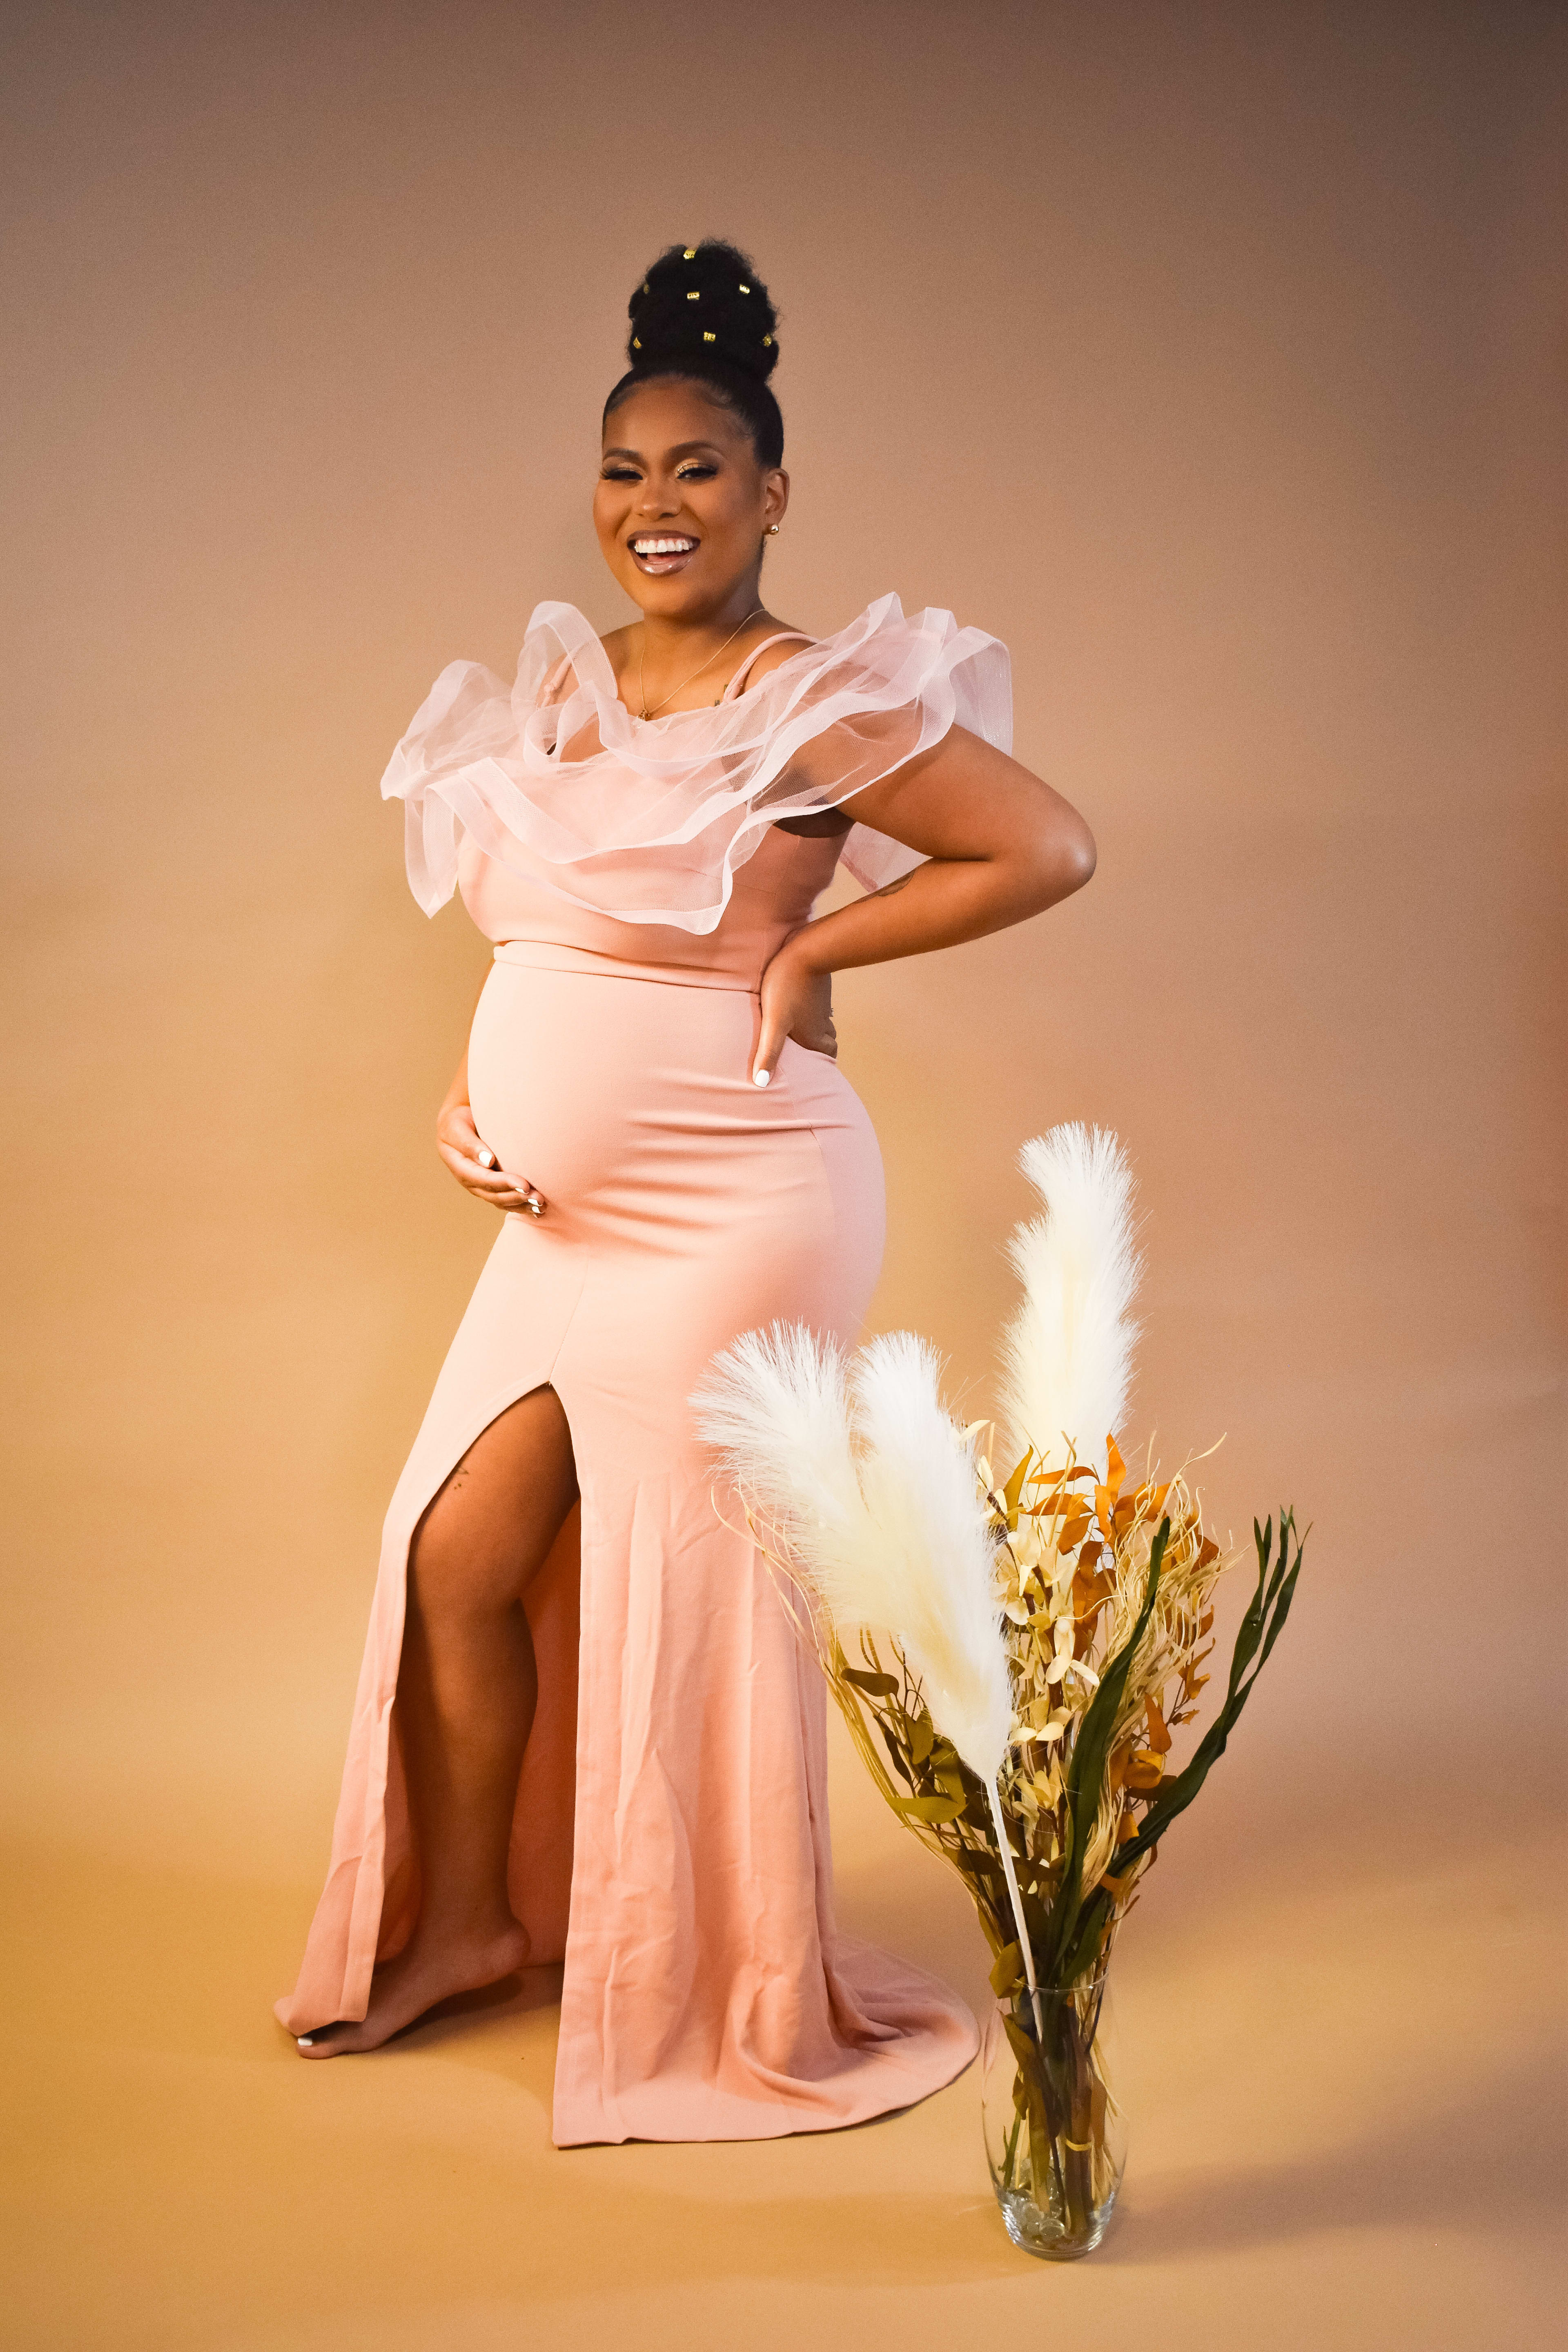 A pregnant woman in a pink boho dress posing next to a vase of flowers during a maternity photoshoot.